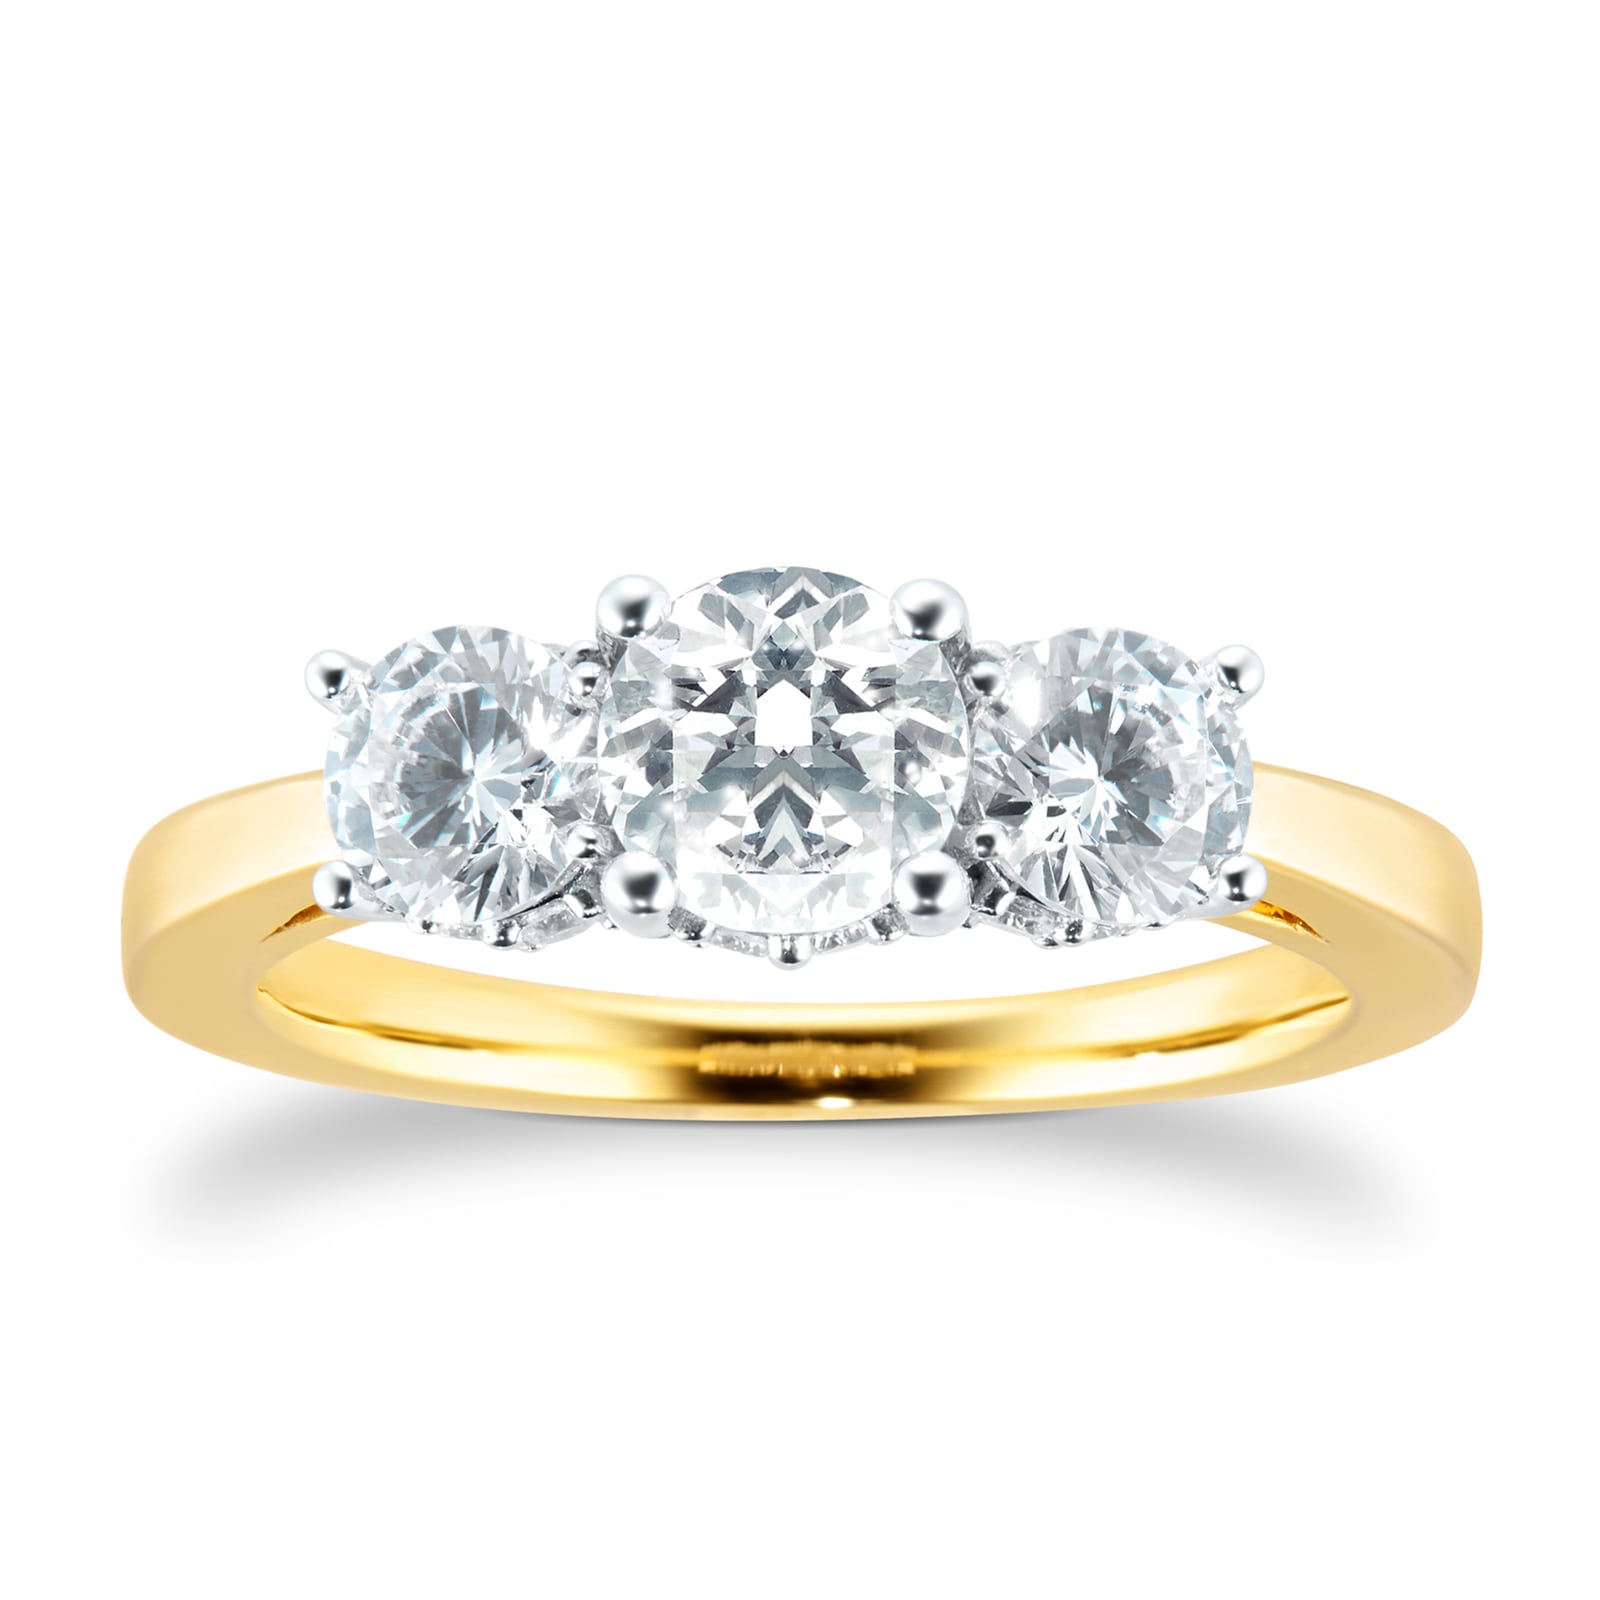 18ct Yellow Gold 1.50cttw Goldsmiths Brightest Diamond Three Stone Engagement Ring - Ring Size N